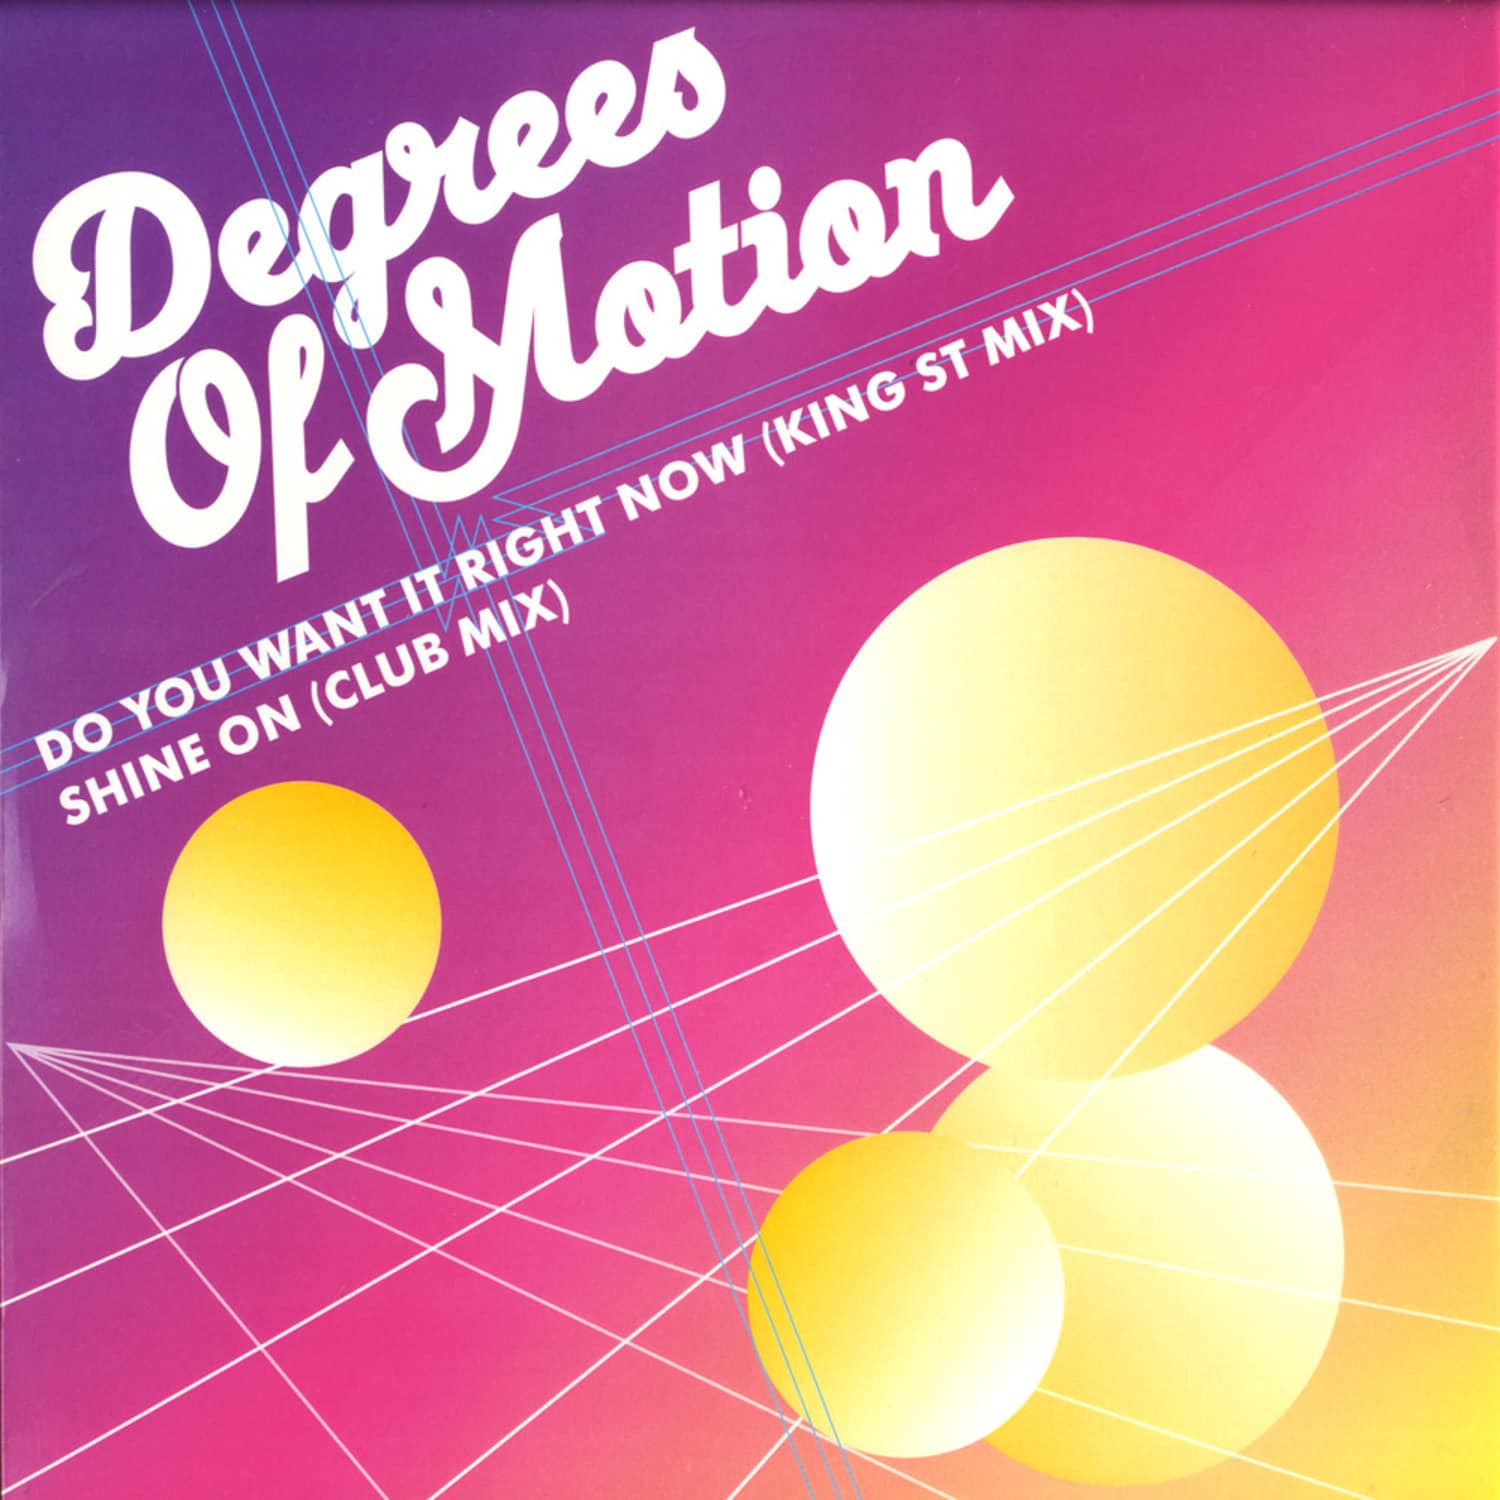 Deegrees Of Motion - DO YOU WANT IT RIGHT NOW